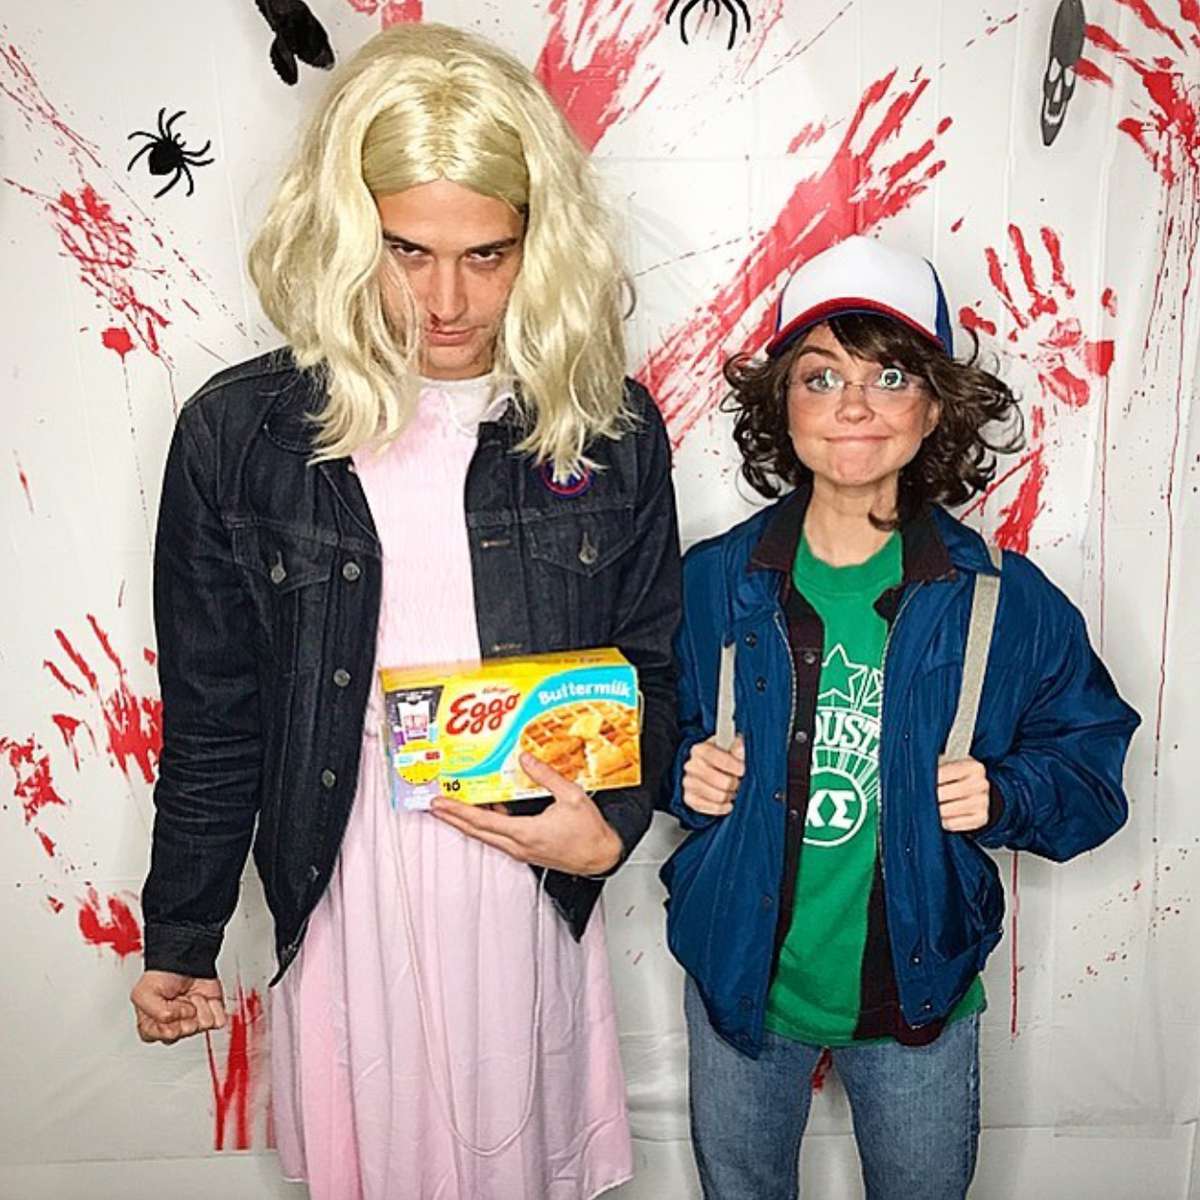 Sarah Hyland and Wells Adams as Dustin and Eleven from Stranger Things